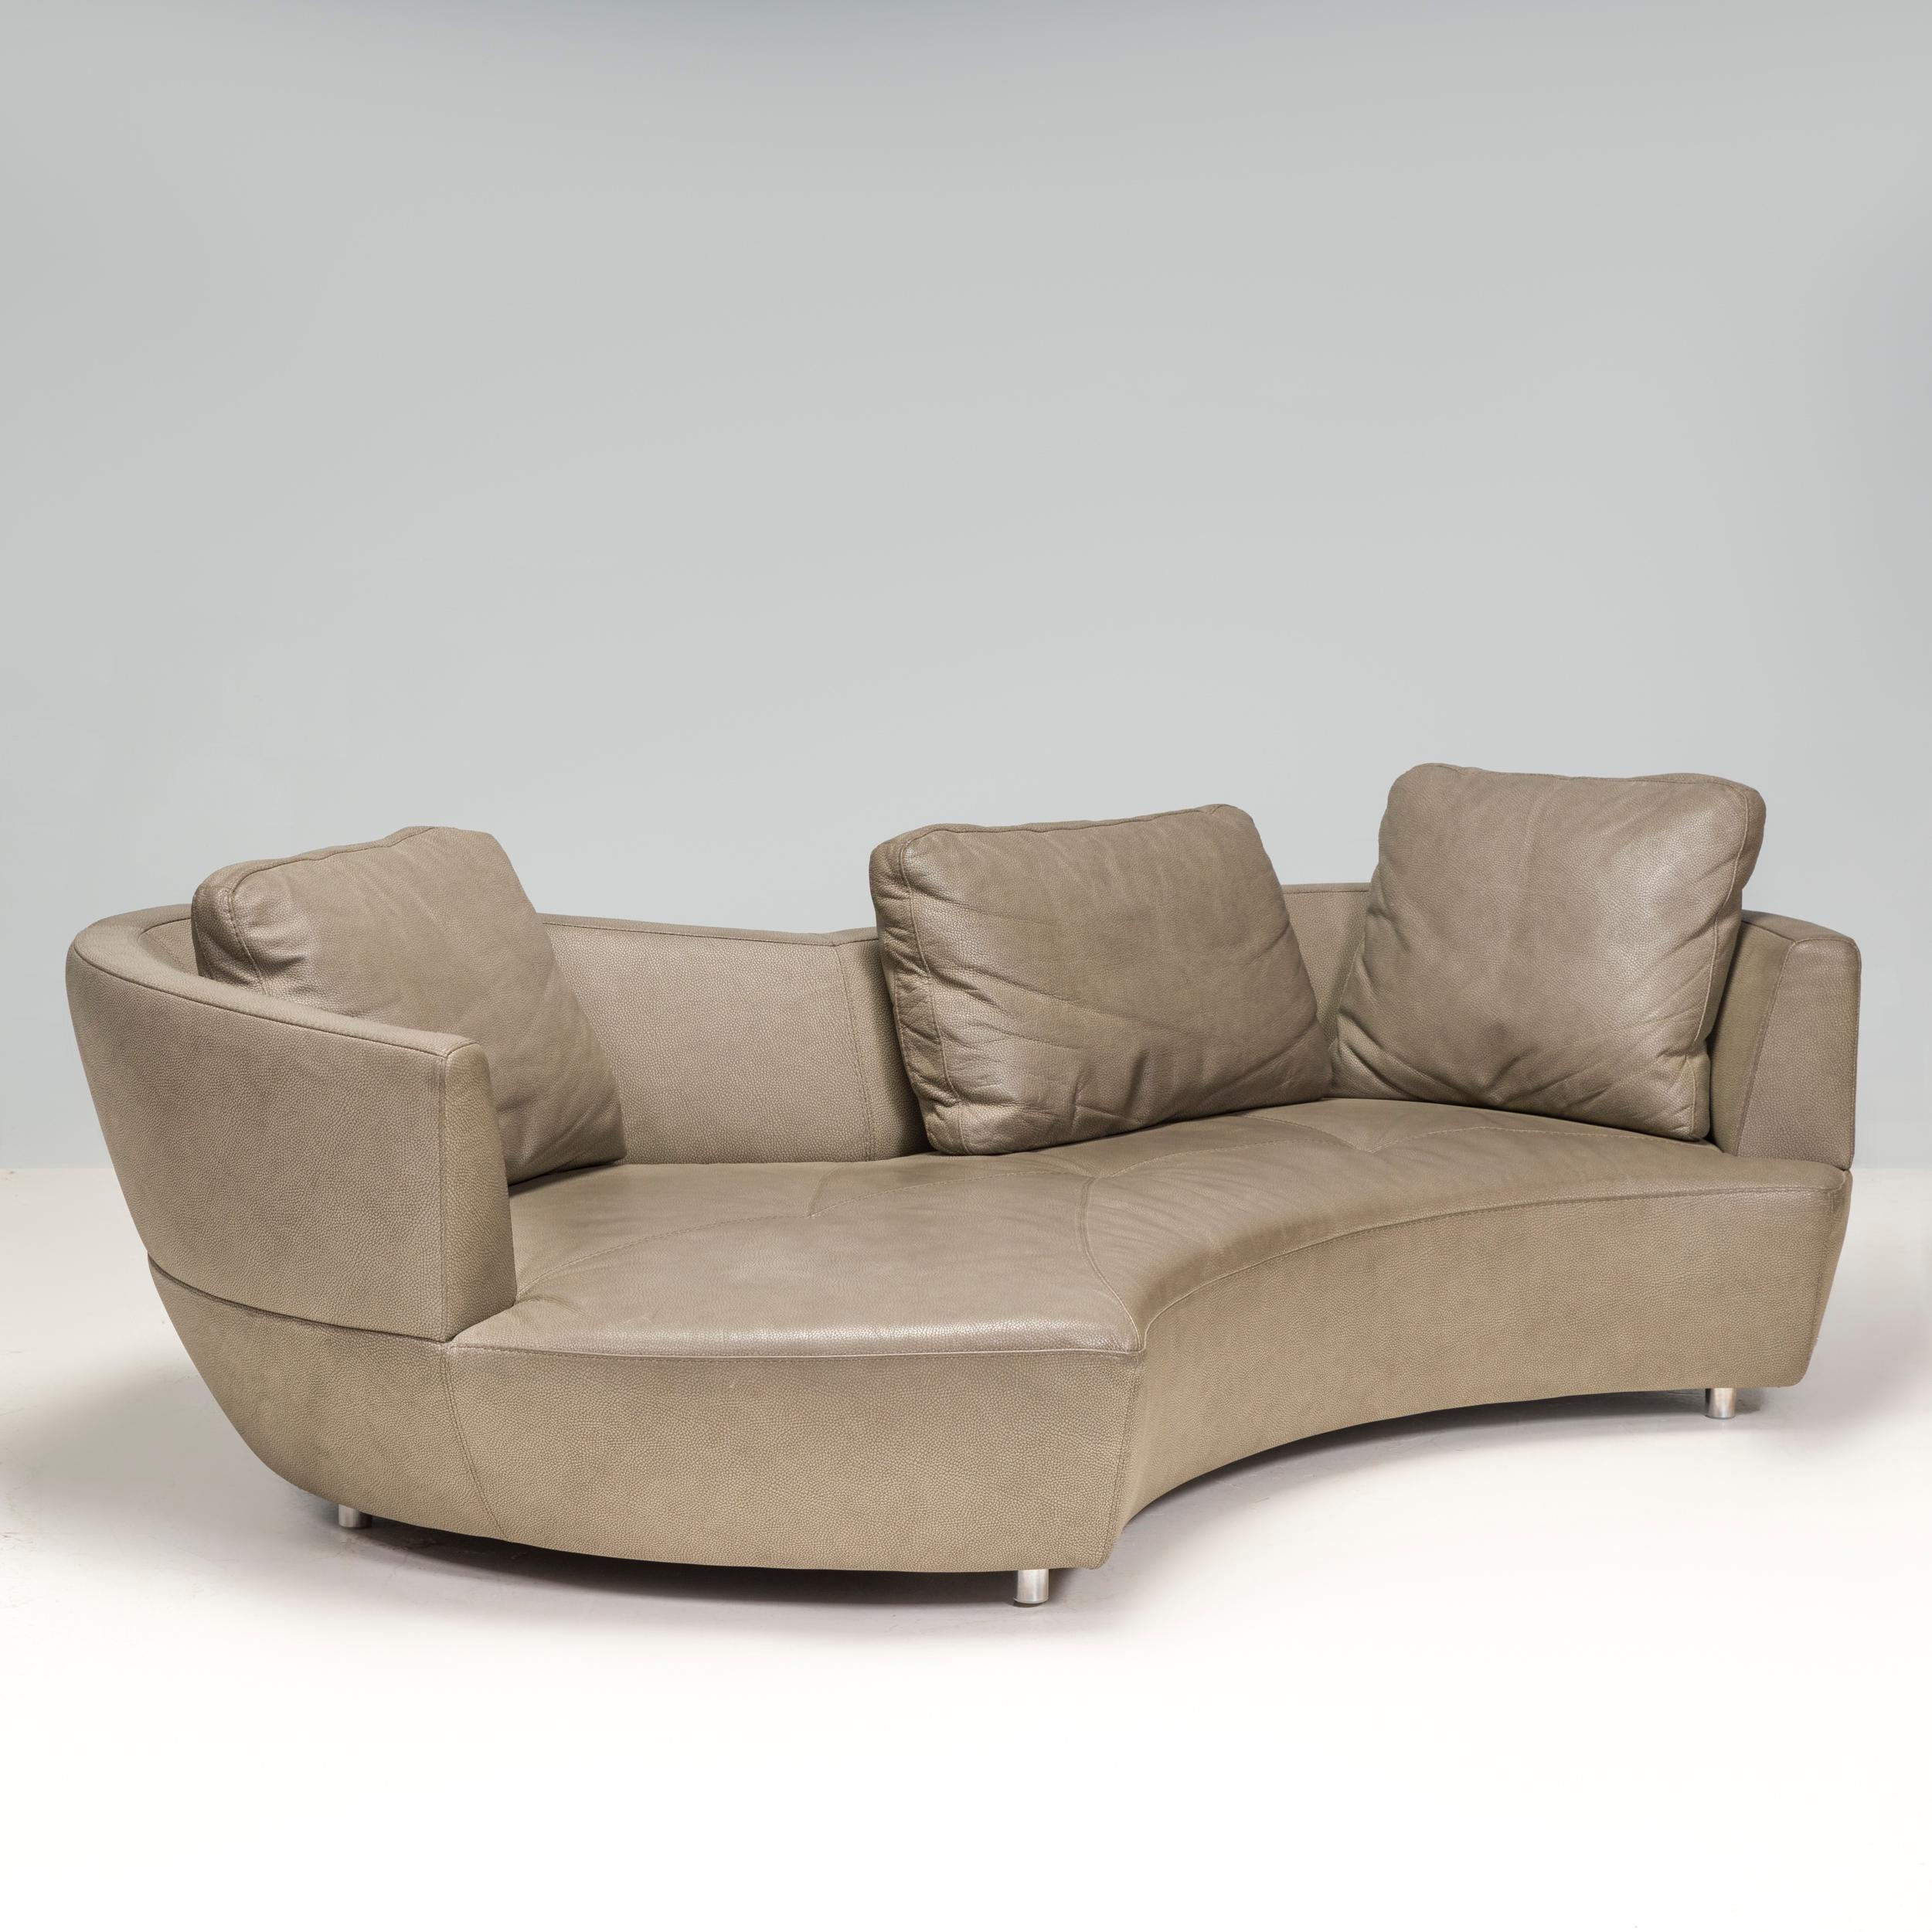 Contemporary Roche Bobois by Gabriele Assmann & Alfred Kleene Leather Digital Curved Sofa For Sale